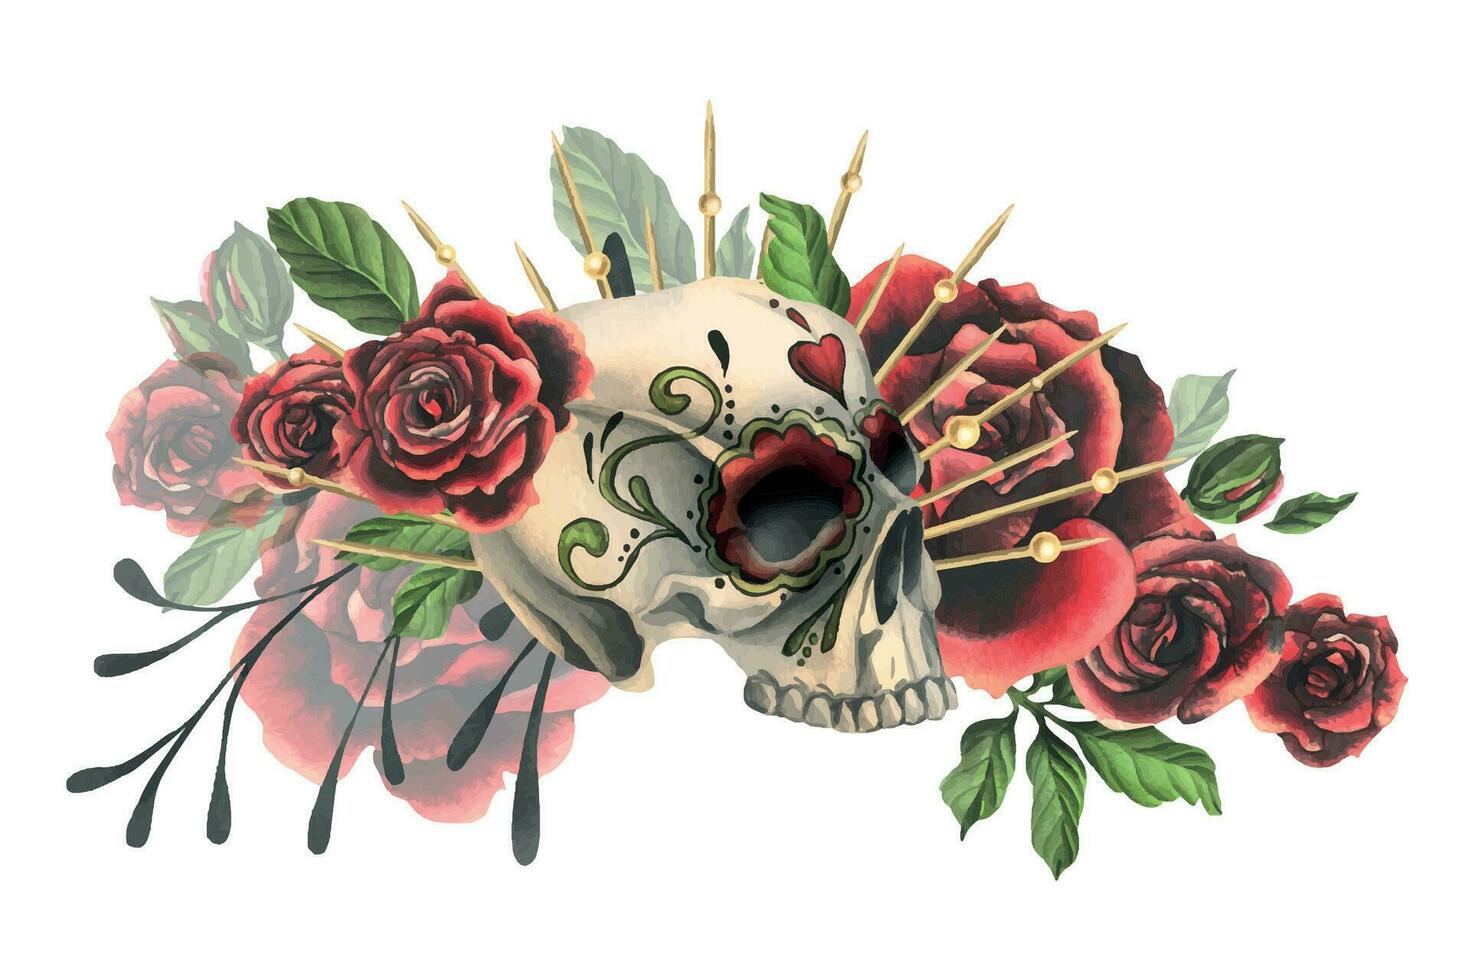 Human skull with an ornament, red roses in a golden crown. Hand drawn watercolor illustration for Halloween, day of the dead, Dia de los muertos. Isolated composition vector